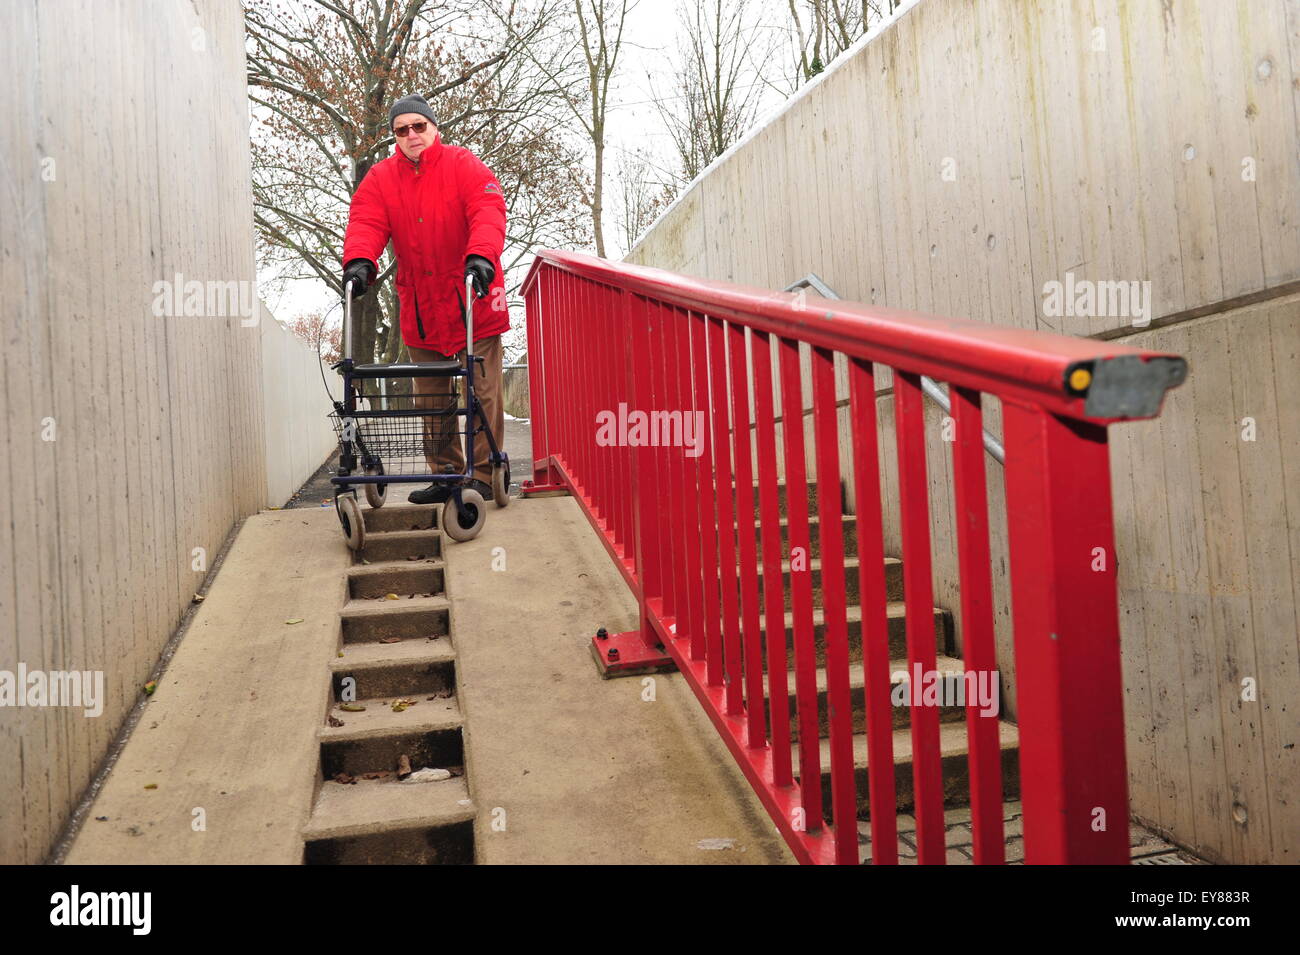 Worms, Germany - December 1, 2010: Old man having difficulties to move barrier-free though his city Stock Photo